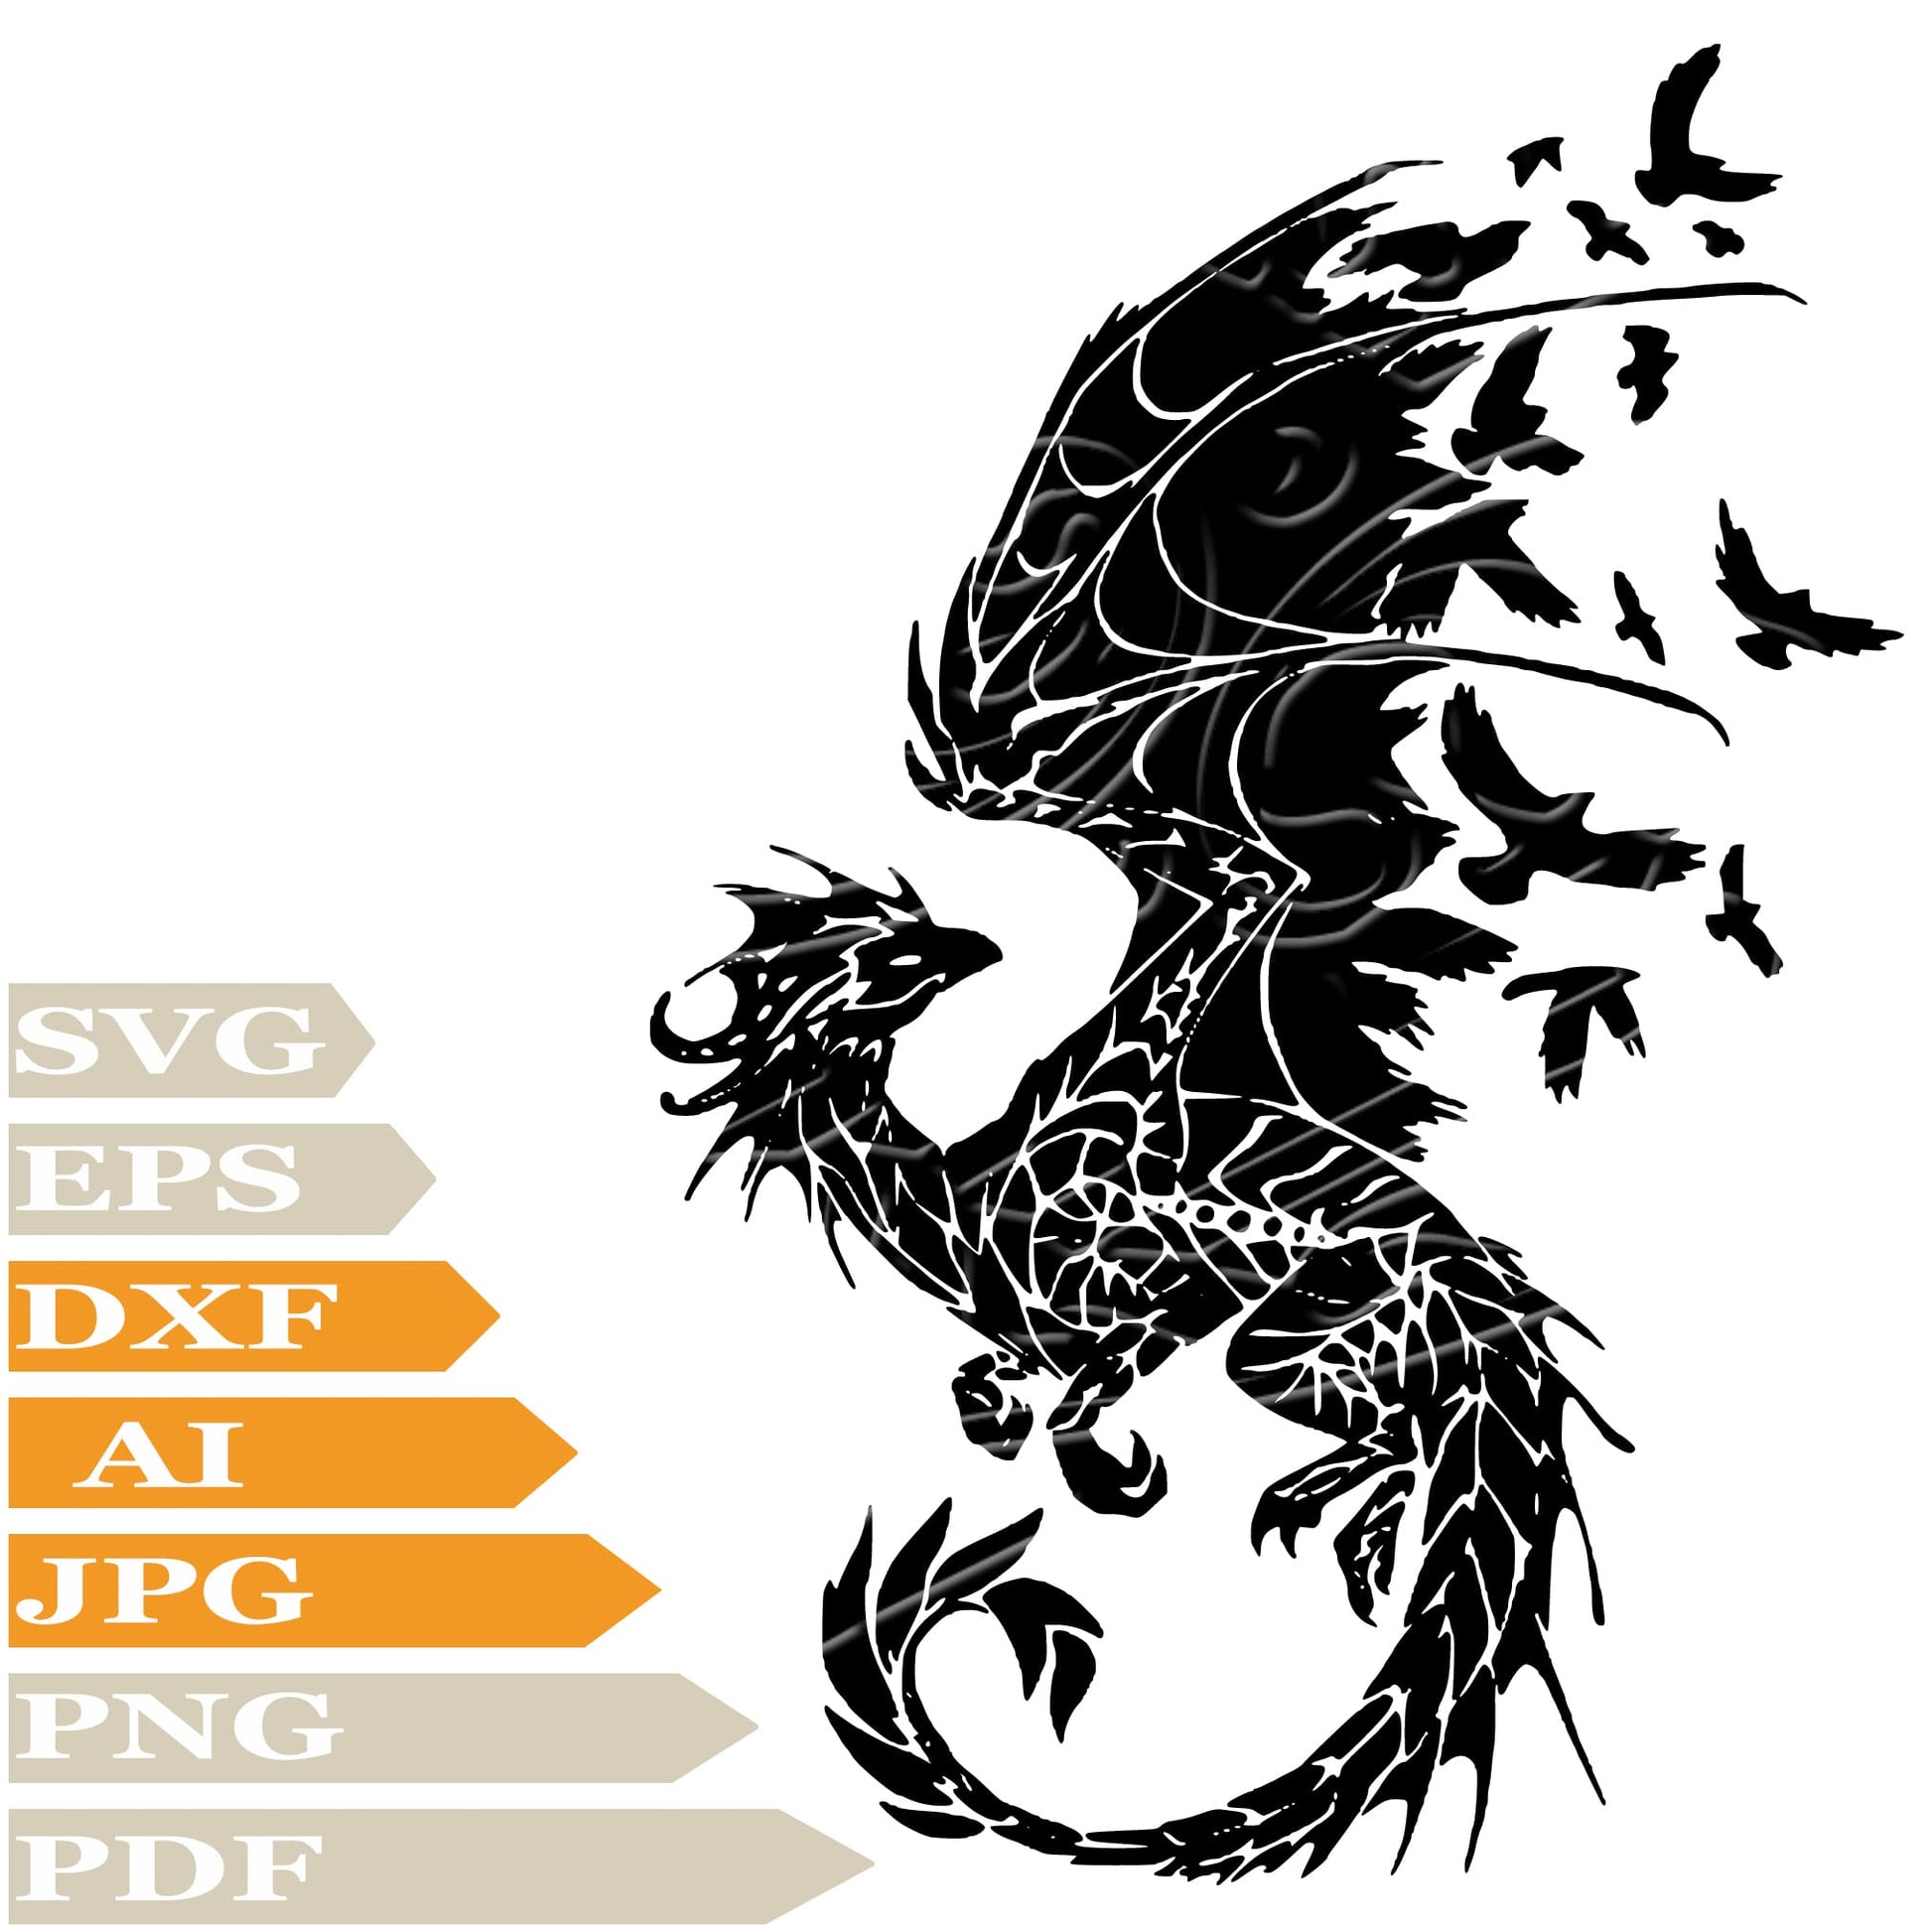 Dragon Svg File, Image Cut, Png, For Tattoo, Silhouette, Digital Vector Download, Cut File, Clipart, For Cricut